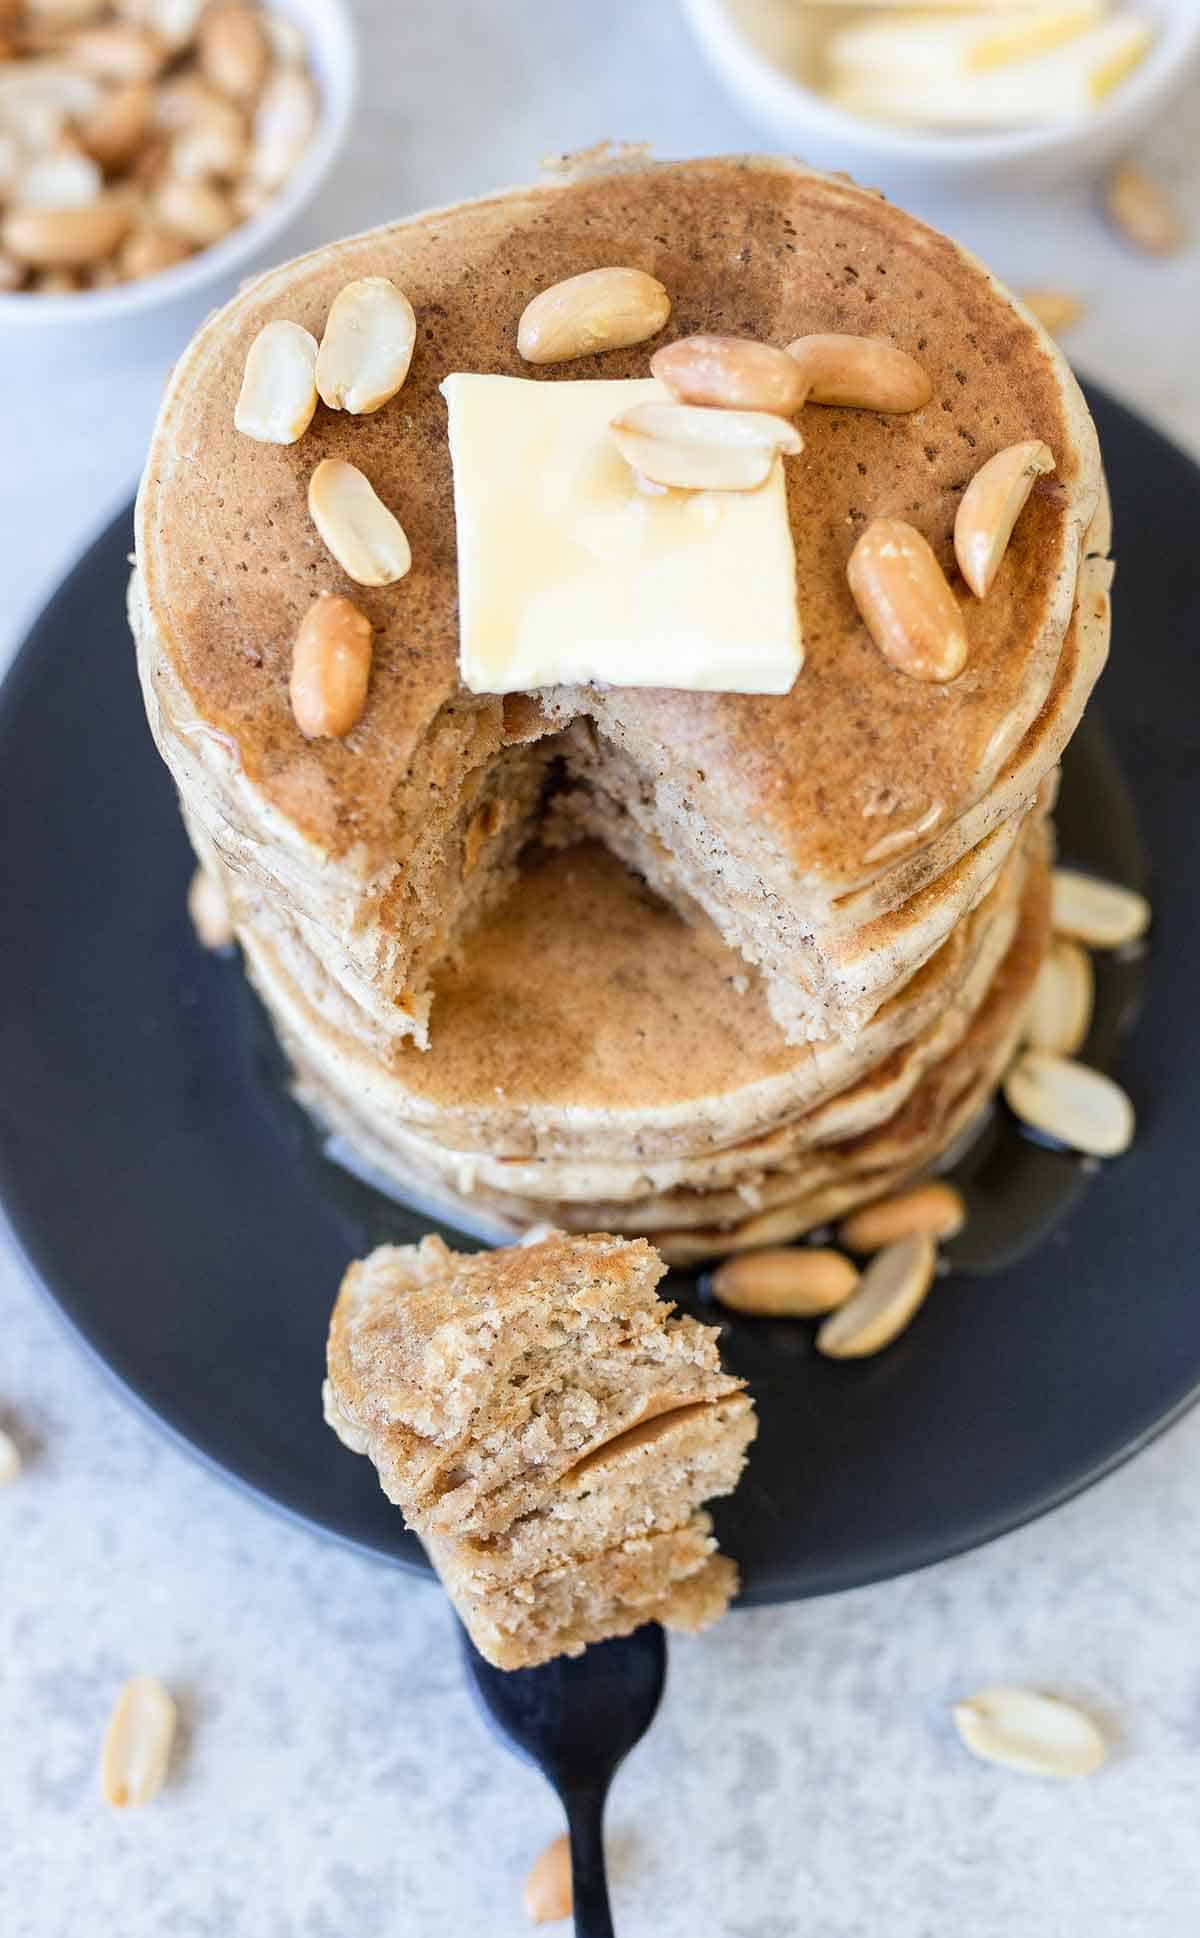 cut into the peanut butter pancakes